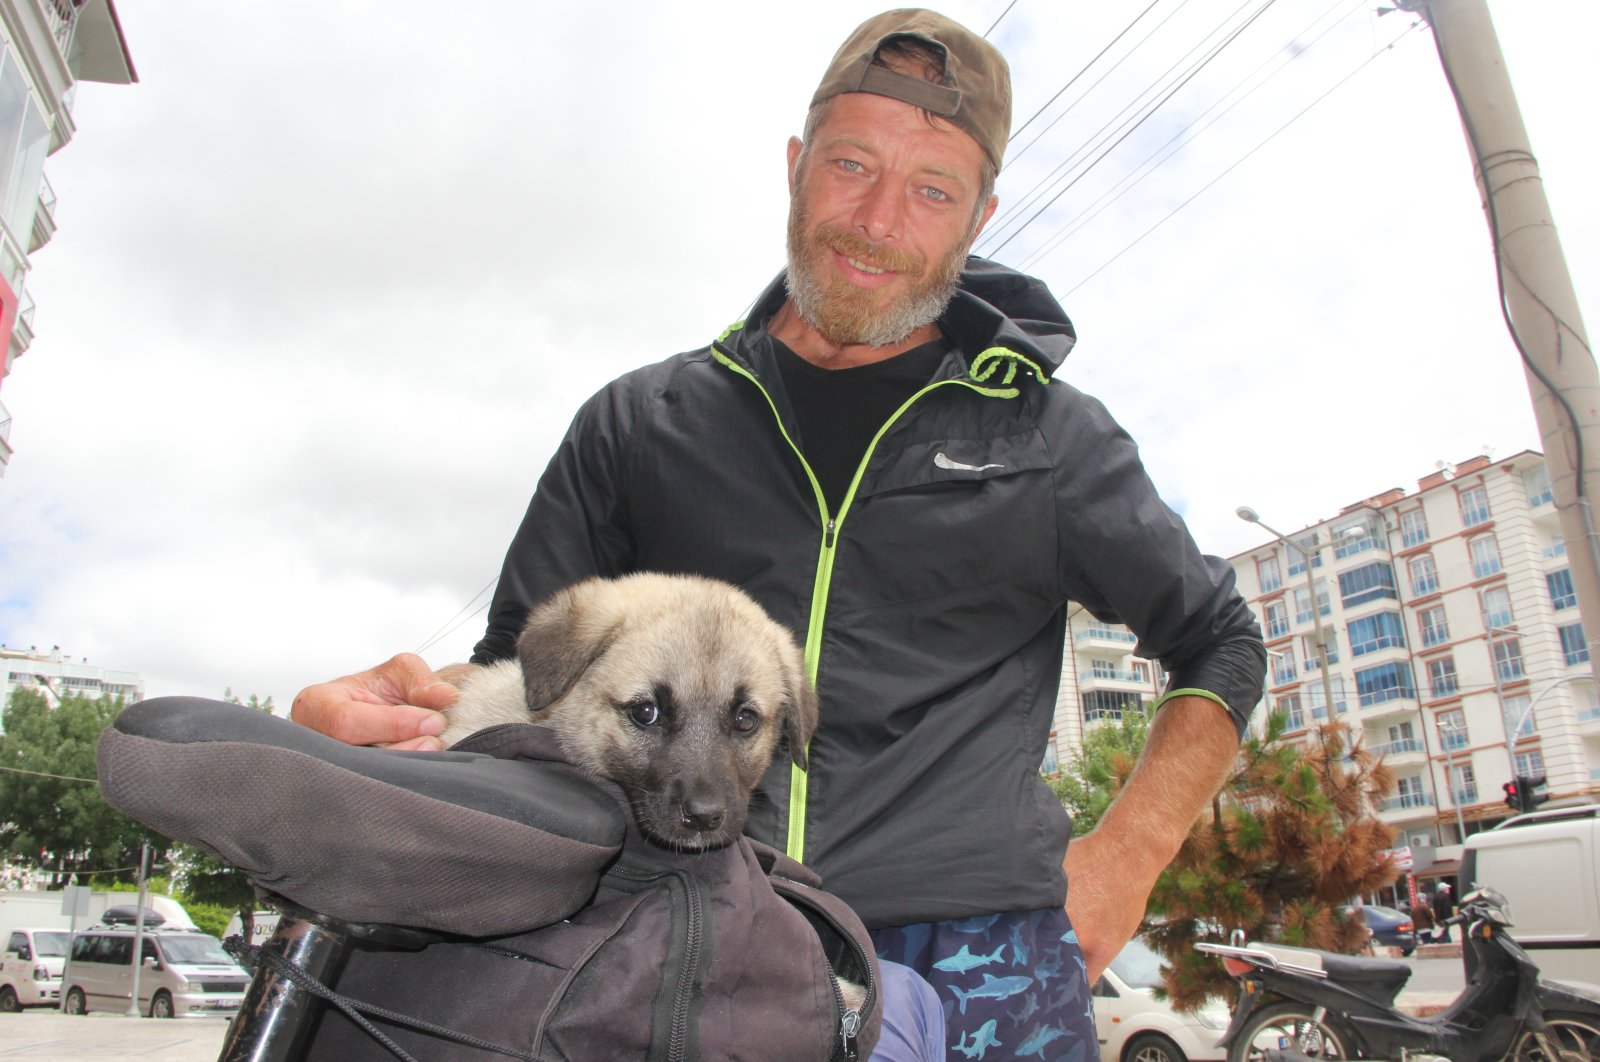 The cyclist Onur Yorulmaz, 40, who set out from Istanbul and traveled to 29 cities so far, is touring Turkey with a 2-month-old puppy that he adopted after its mother died, Afyonkarahisar, Turkey, June 29, 2022. (AA Photo)